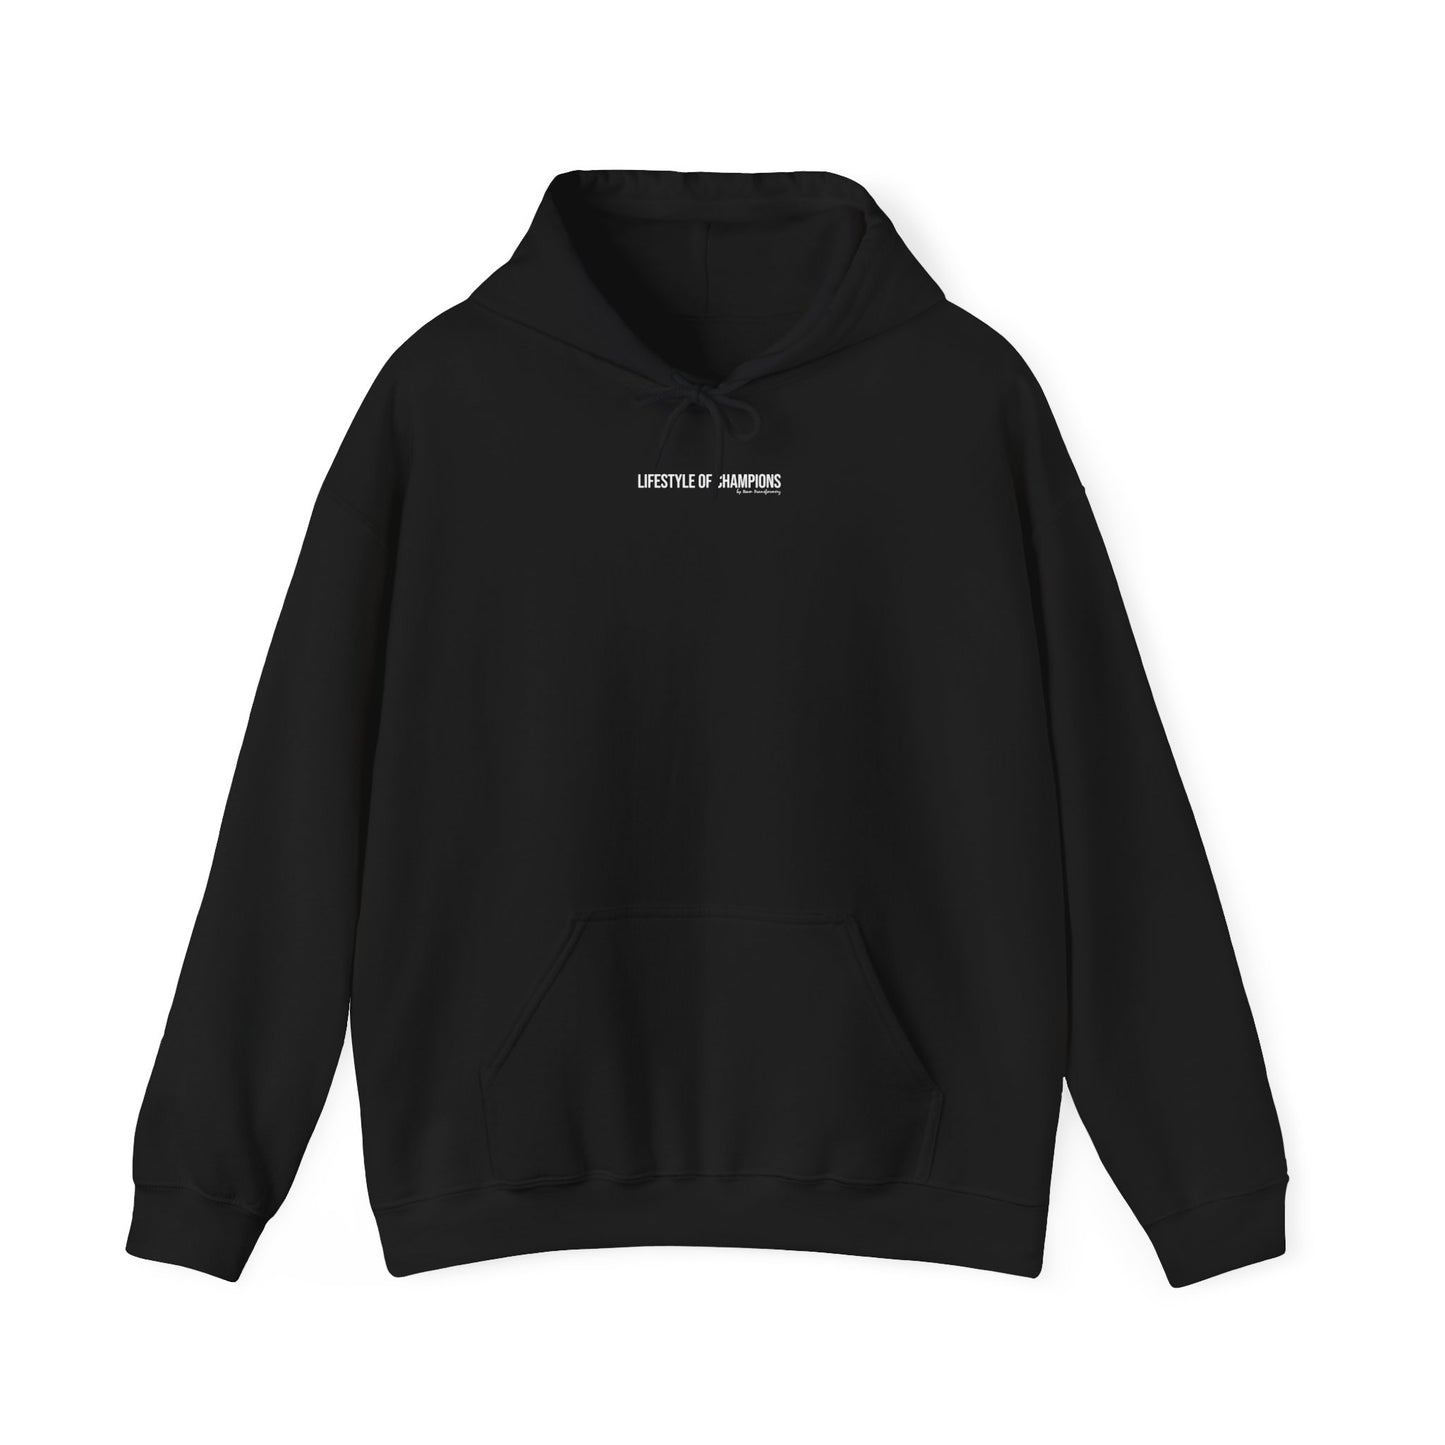 ARE YOU READY? x Hoodie